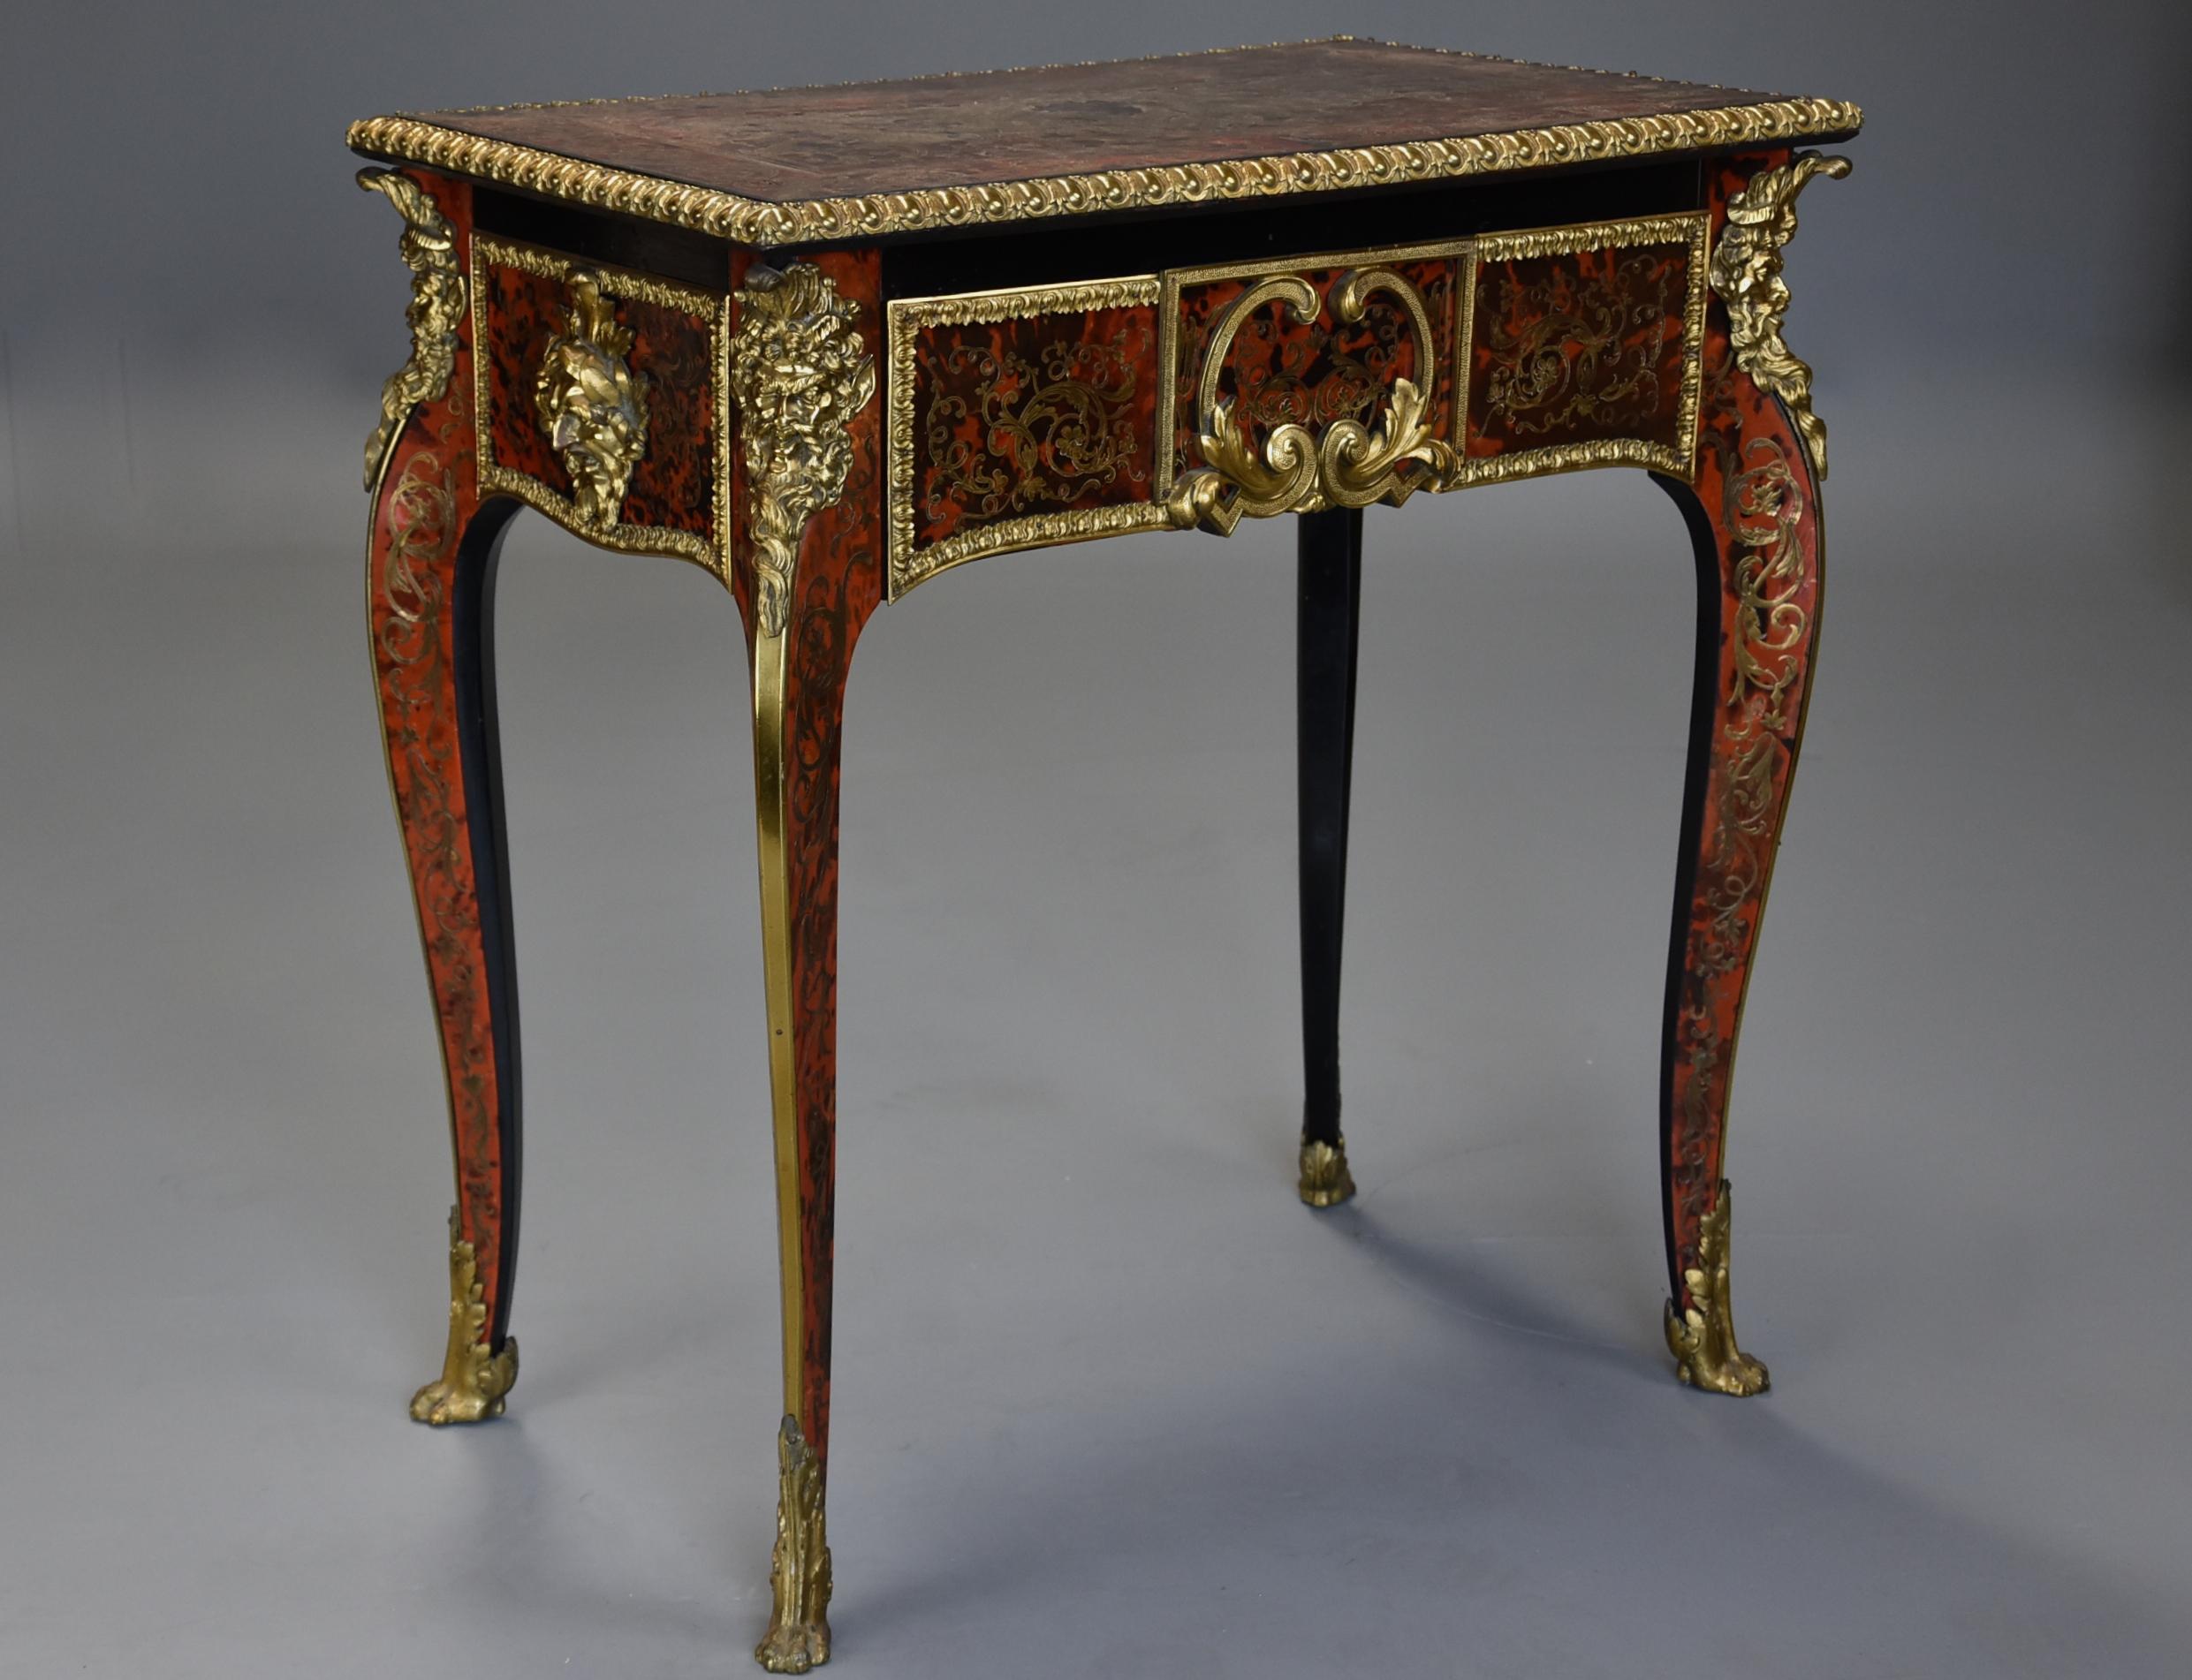 A superb quality English early 19th century (circa 1820) ‘Boulle’ centre table in the French style and of fine proportions, in very good, original condition in the manner of Andre-Charles Boulle, possibly by Thomas Parker.

The table consists of a